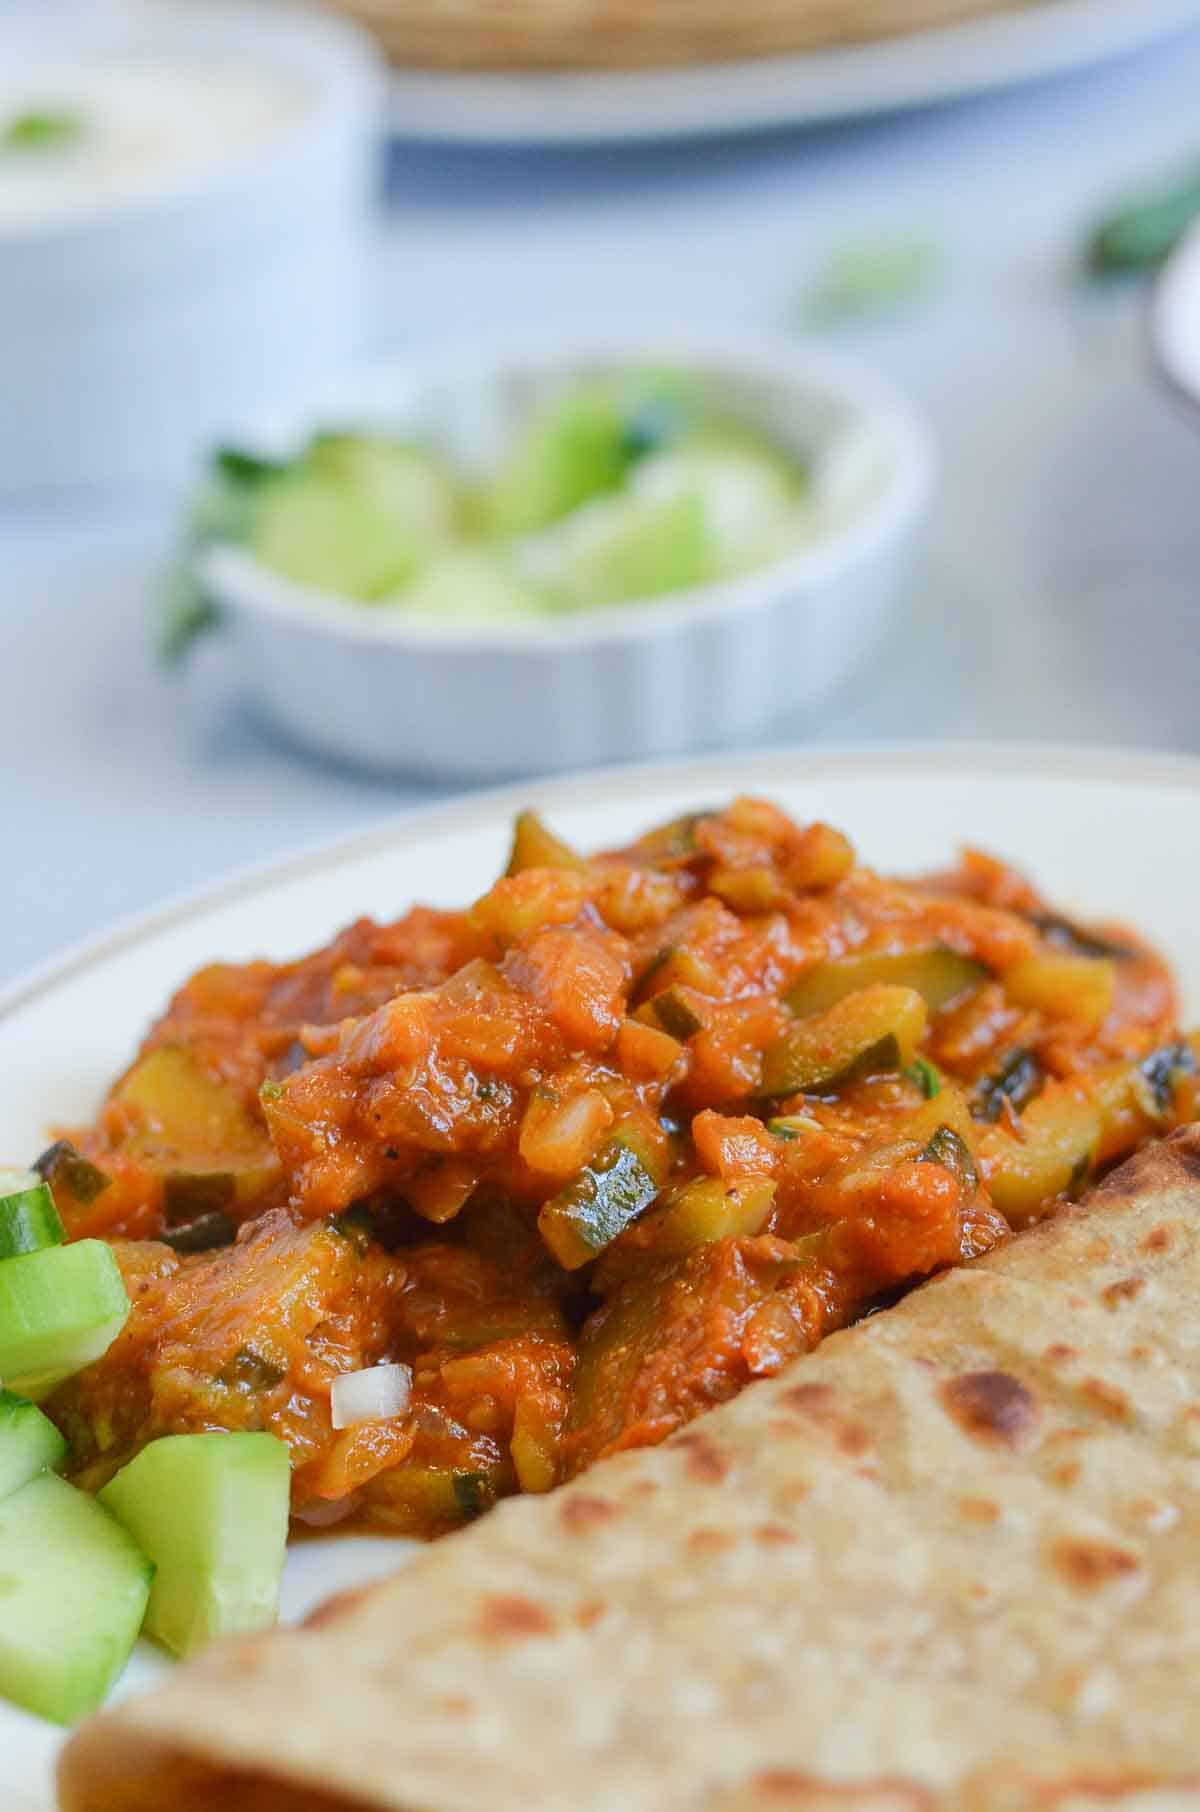 courgette curry served with flatbread (paratha)